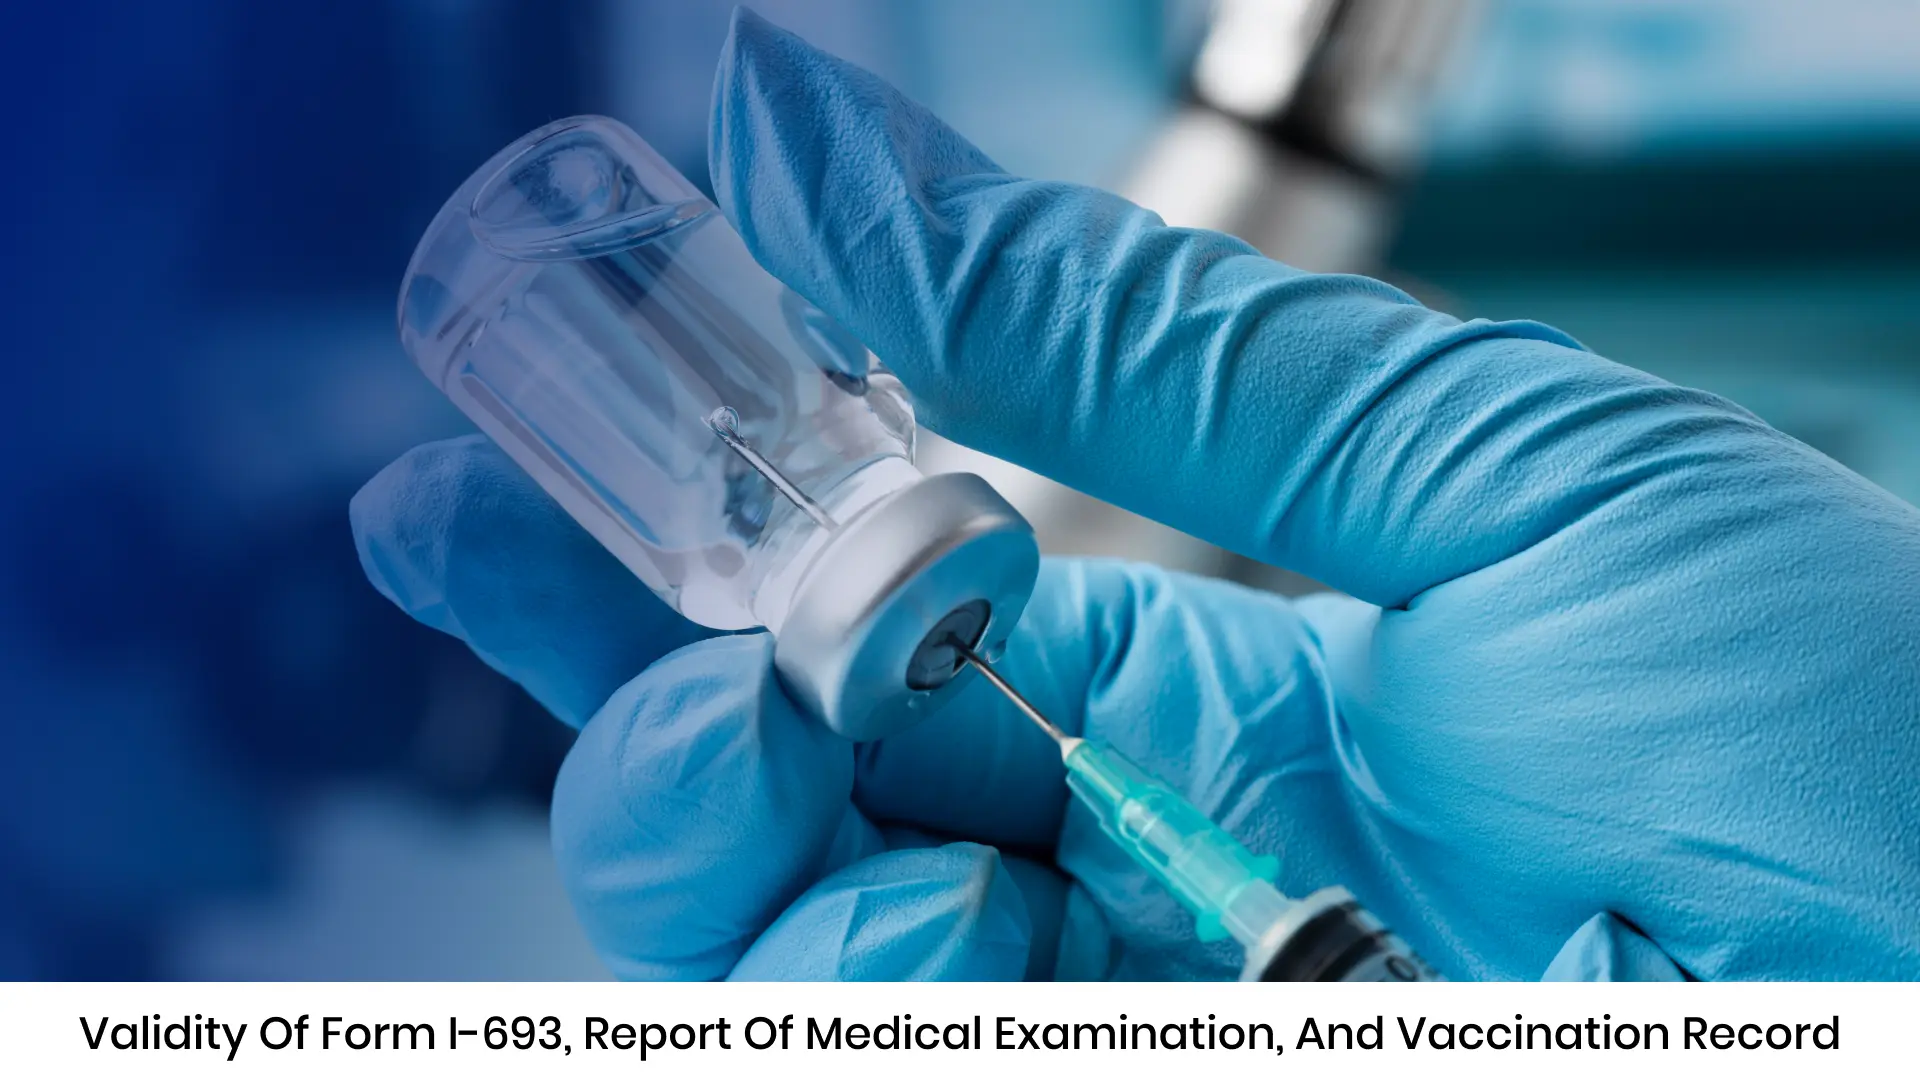 Validity of Form I-693, Report of Medical Examination, and Vaccination Record